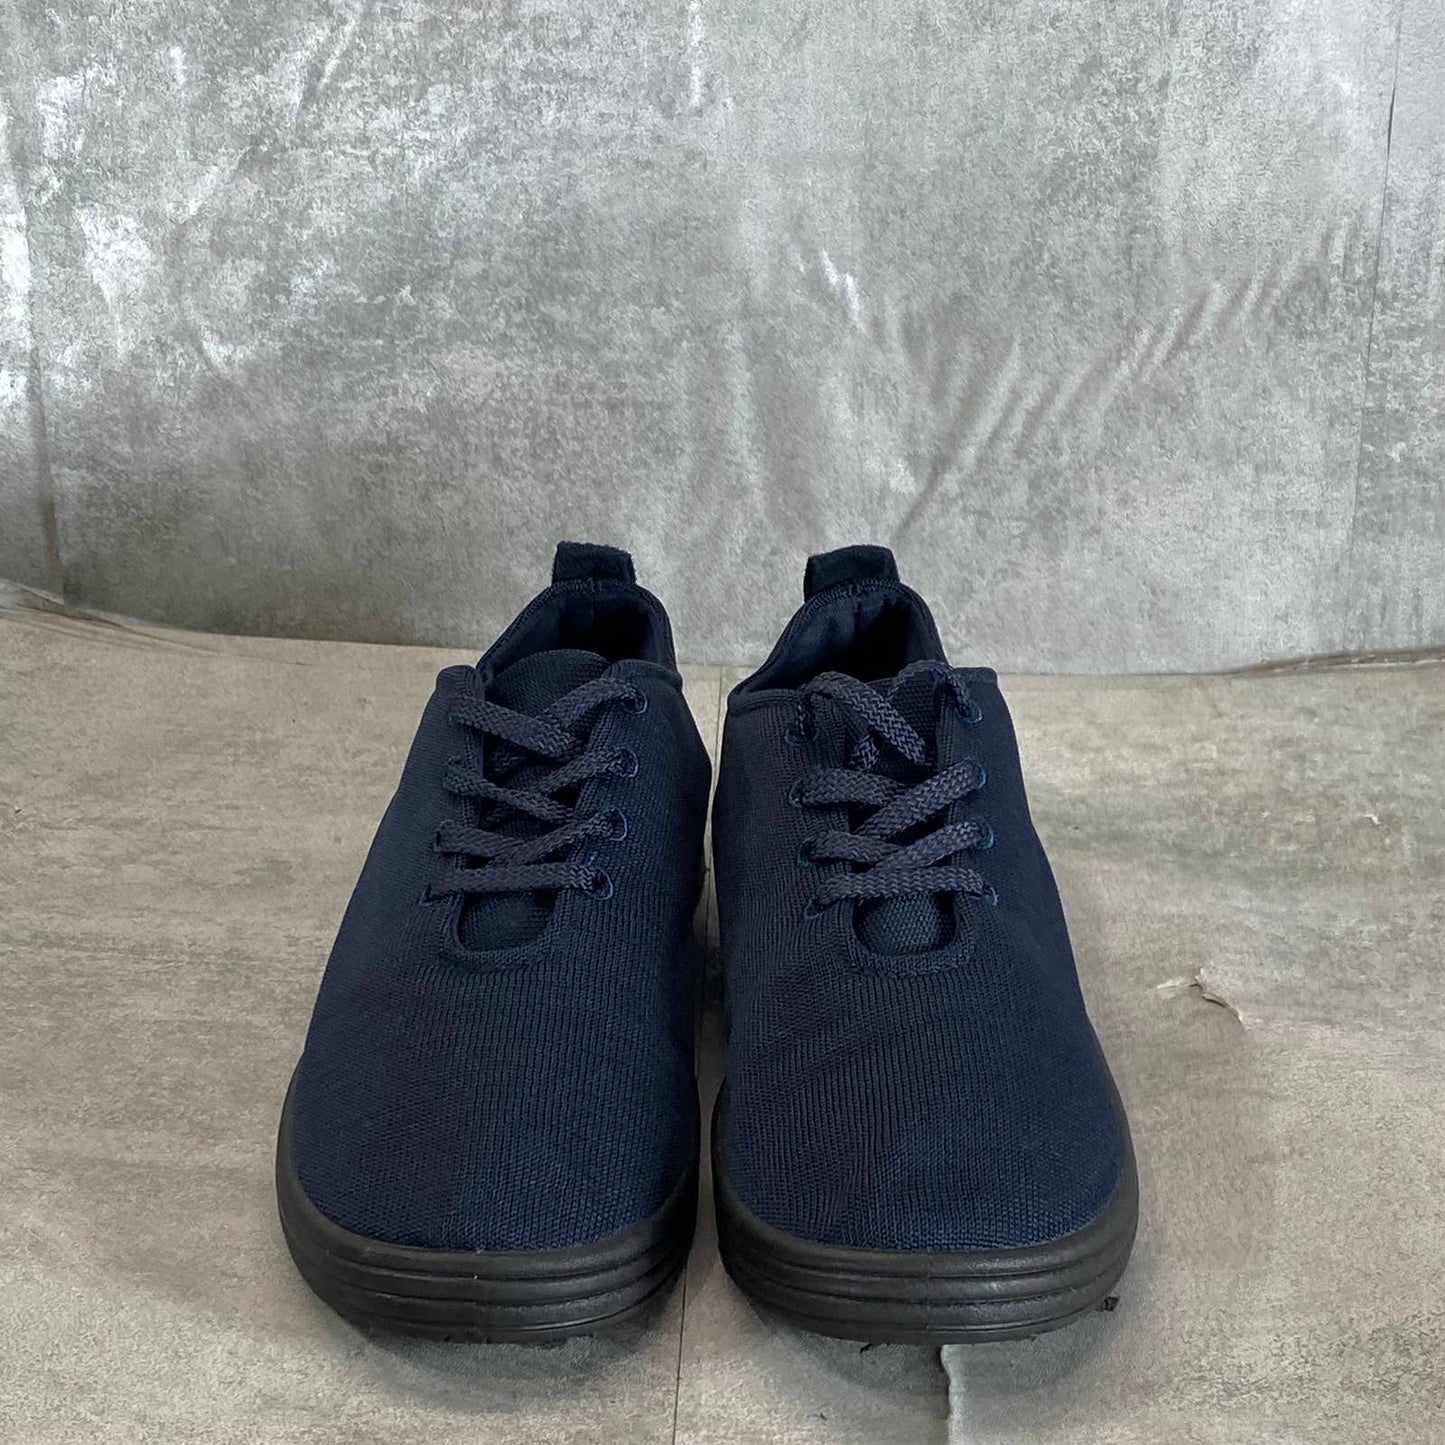 EASY STREET Women's Navy Command Knit Lace-Up Sneakers SZ 8.5